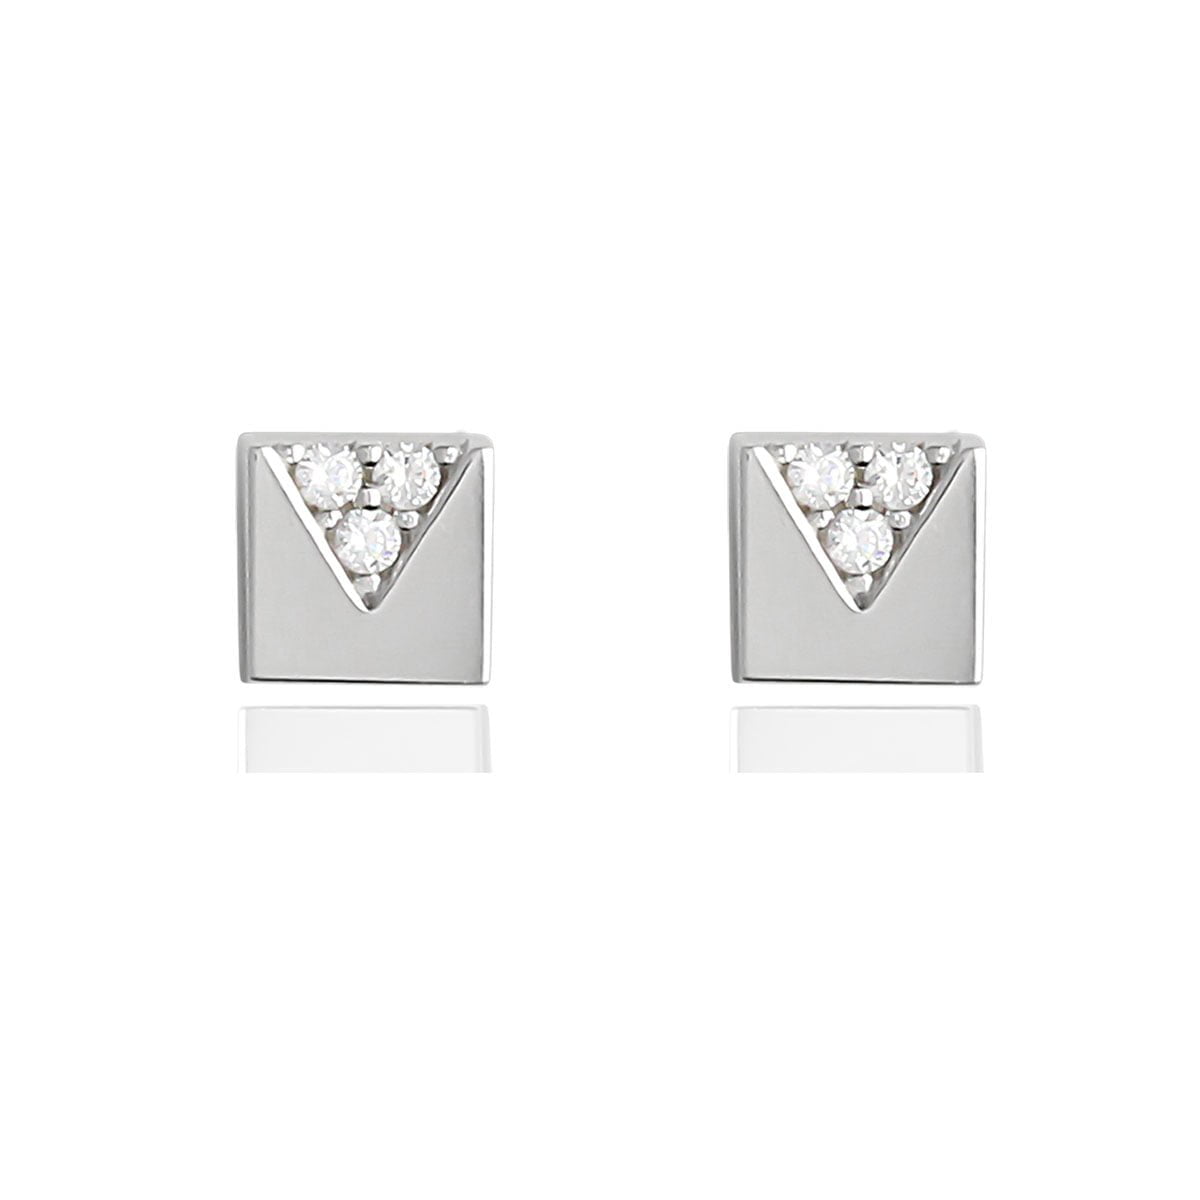 3313 Gia Square Triangle 18ct White Gold Stud Earrings